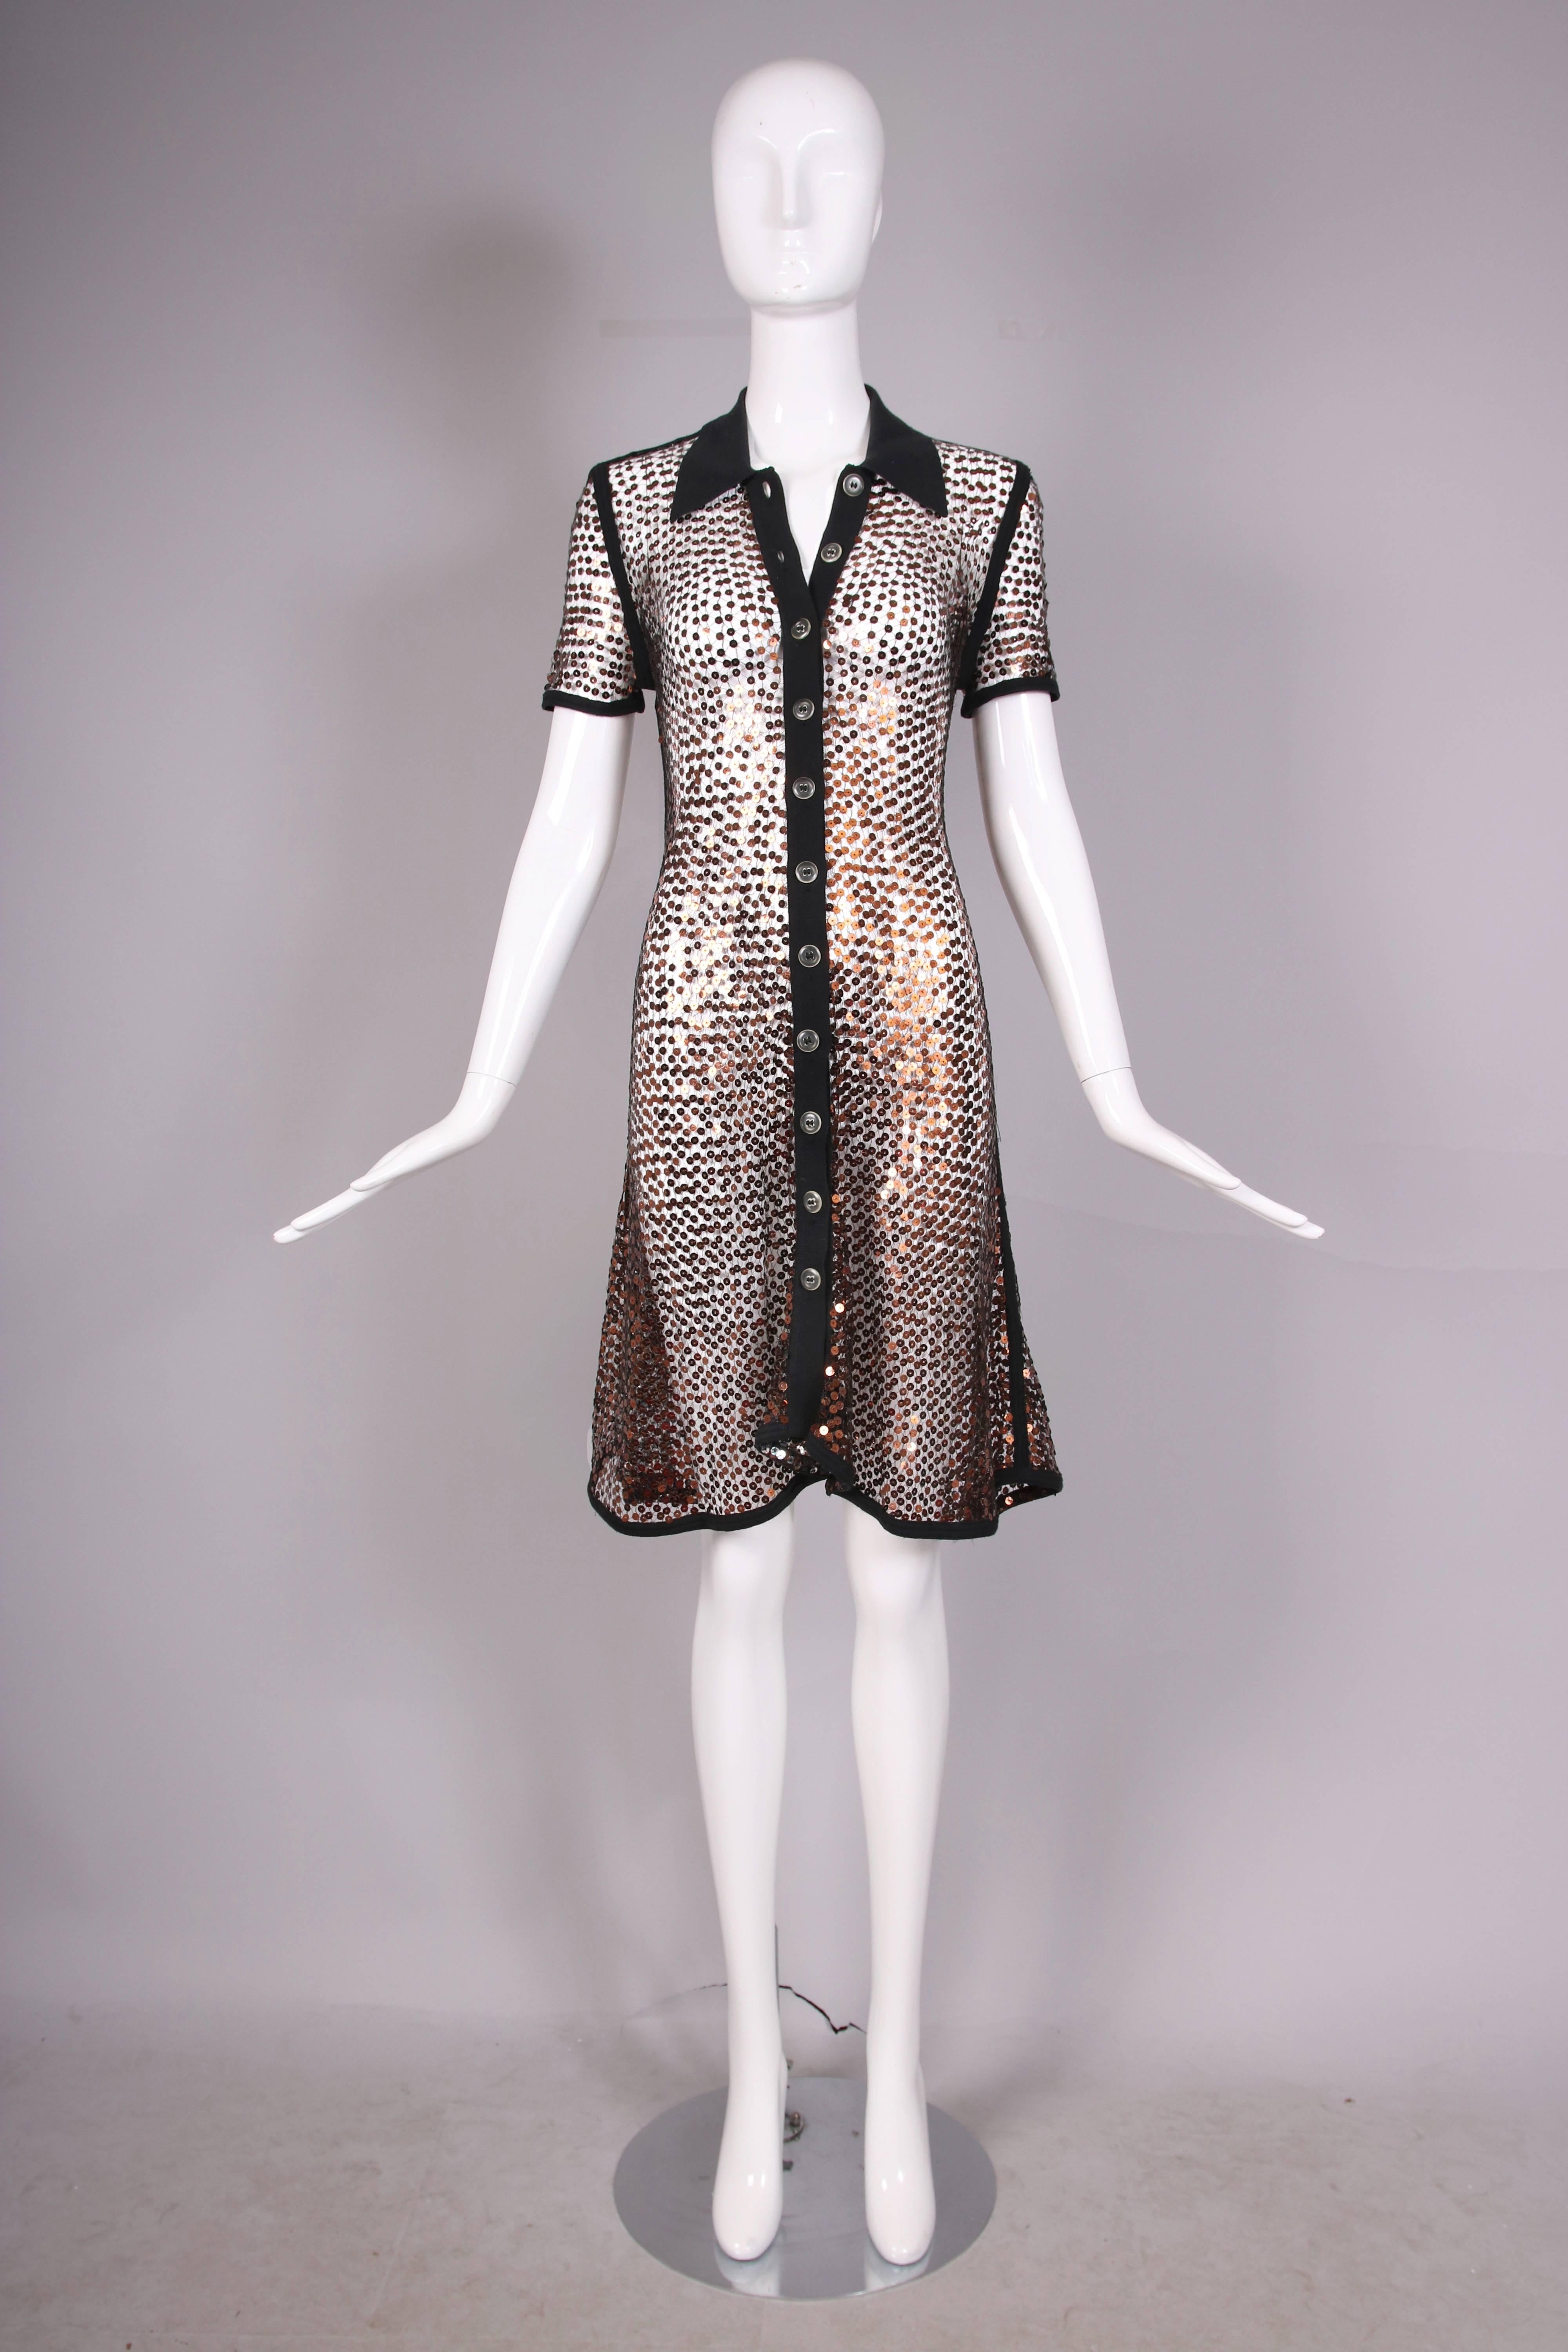 Jean-Paul Gaultier sheer sequined short-sleeved button up shirt dress with ribbed knit collar, button placket and seam insets. In excellent condition with a few missing sequins. 
MEASUREMENTS:
Bust - 34